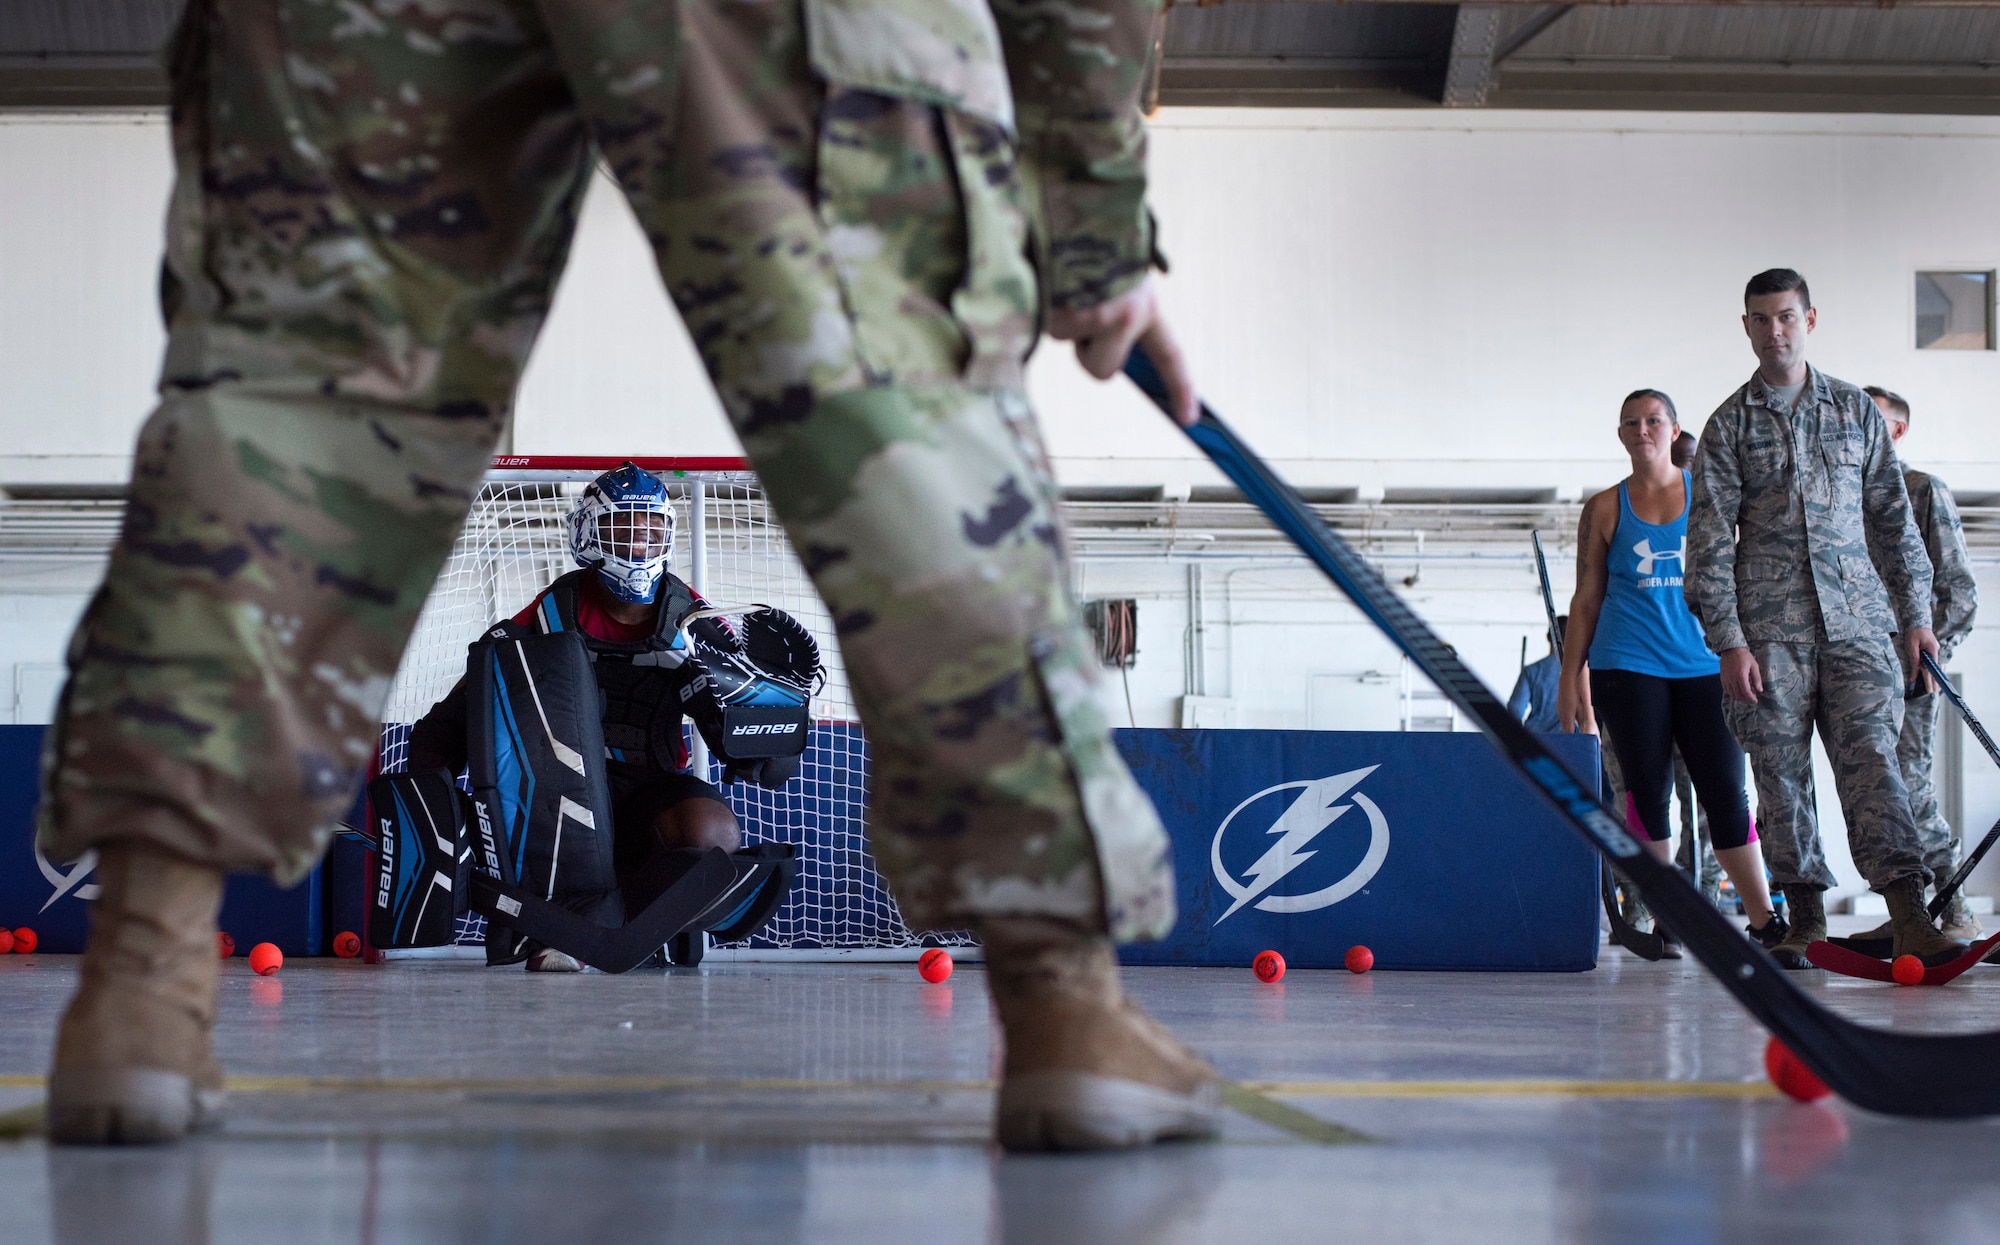 U.S. Air Force Airman 1st Class Ried Patton, an administrator assigned to the 6th Operation Support Squadron, defends a goal during street hockey practice at MacDill Air Force Base, Florida, Oct. 25, 2018.